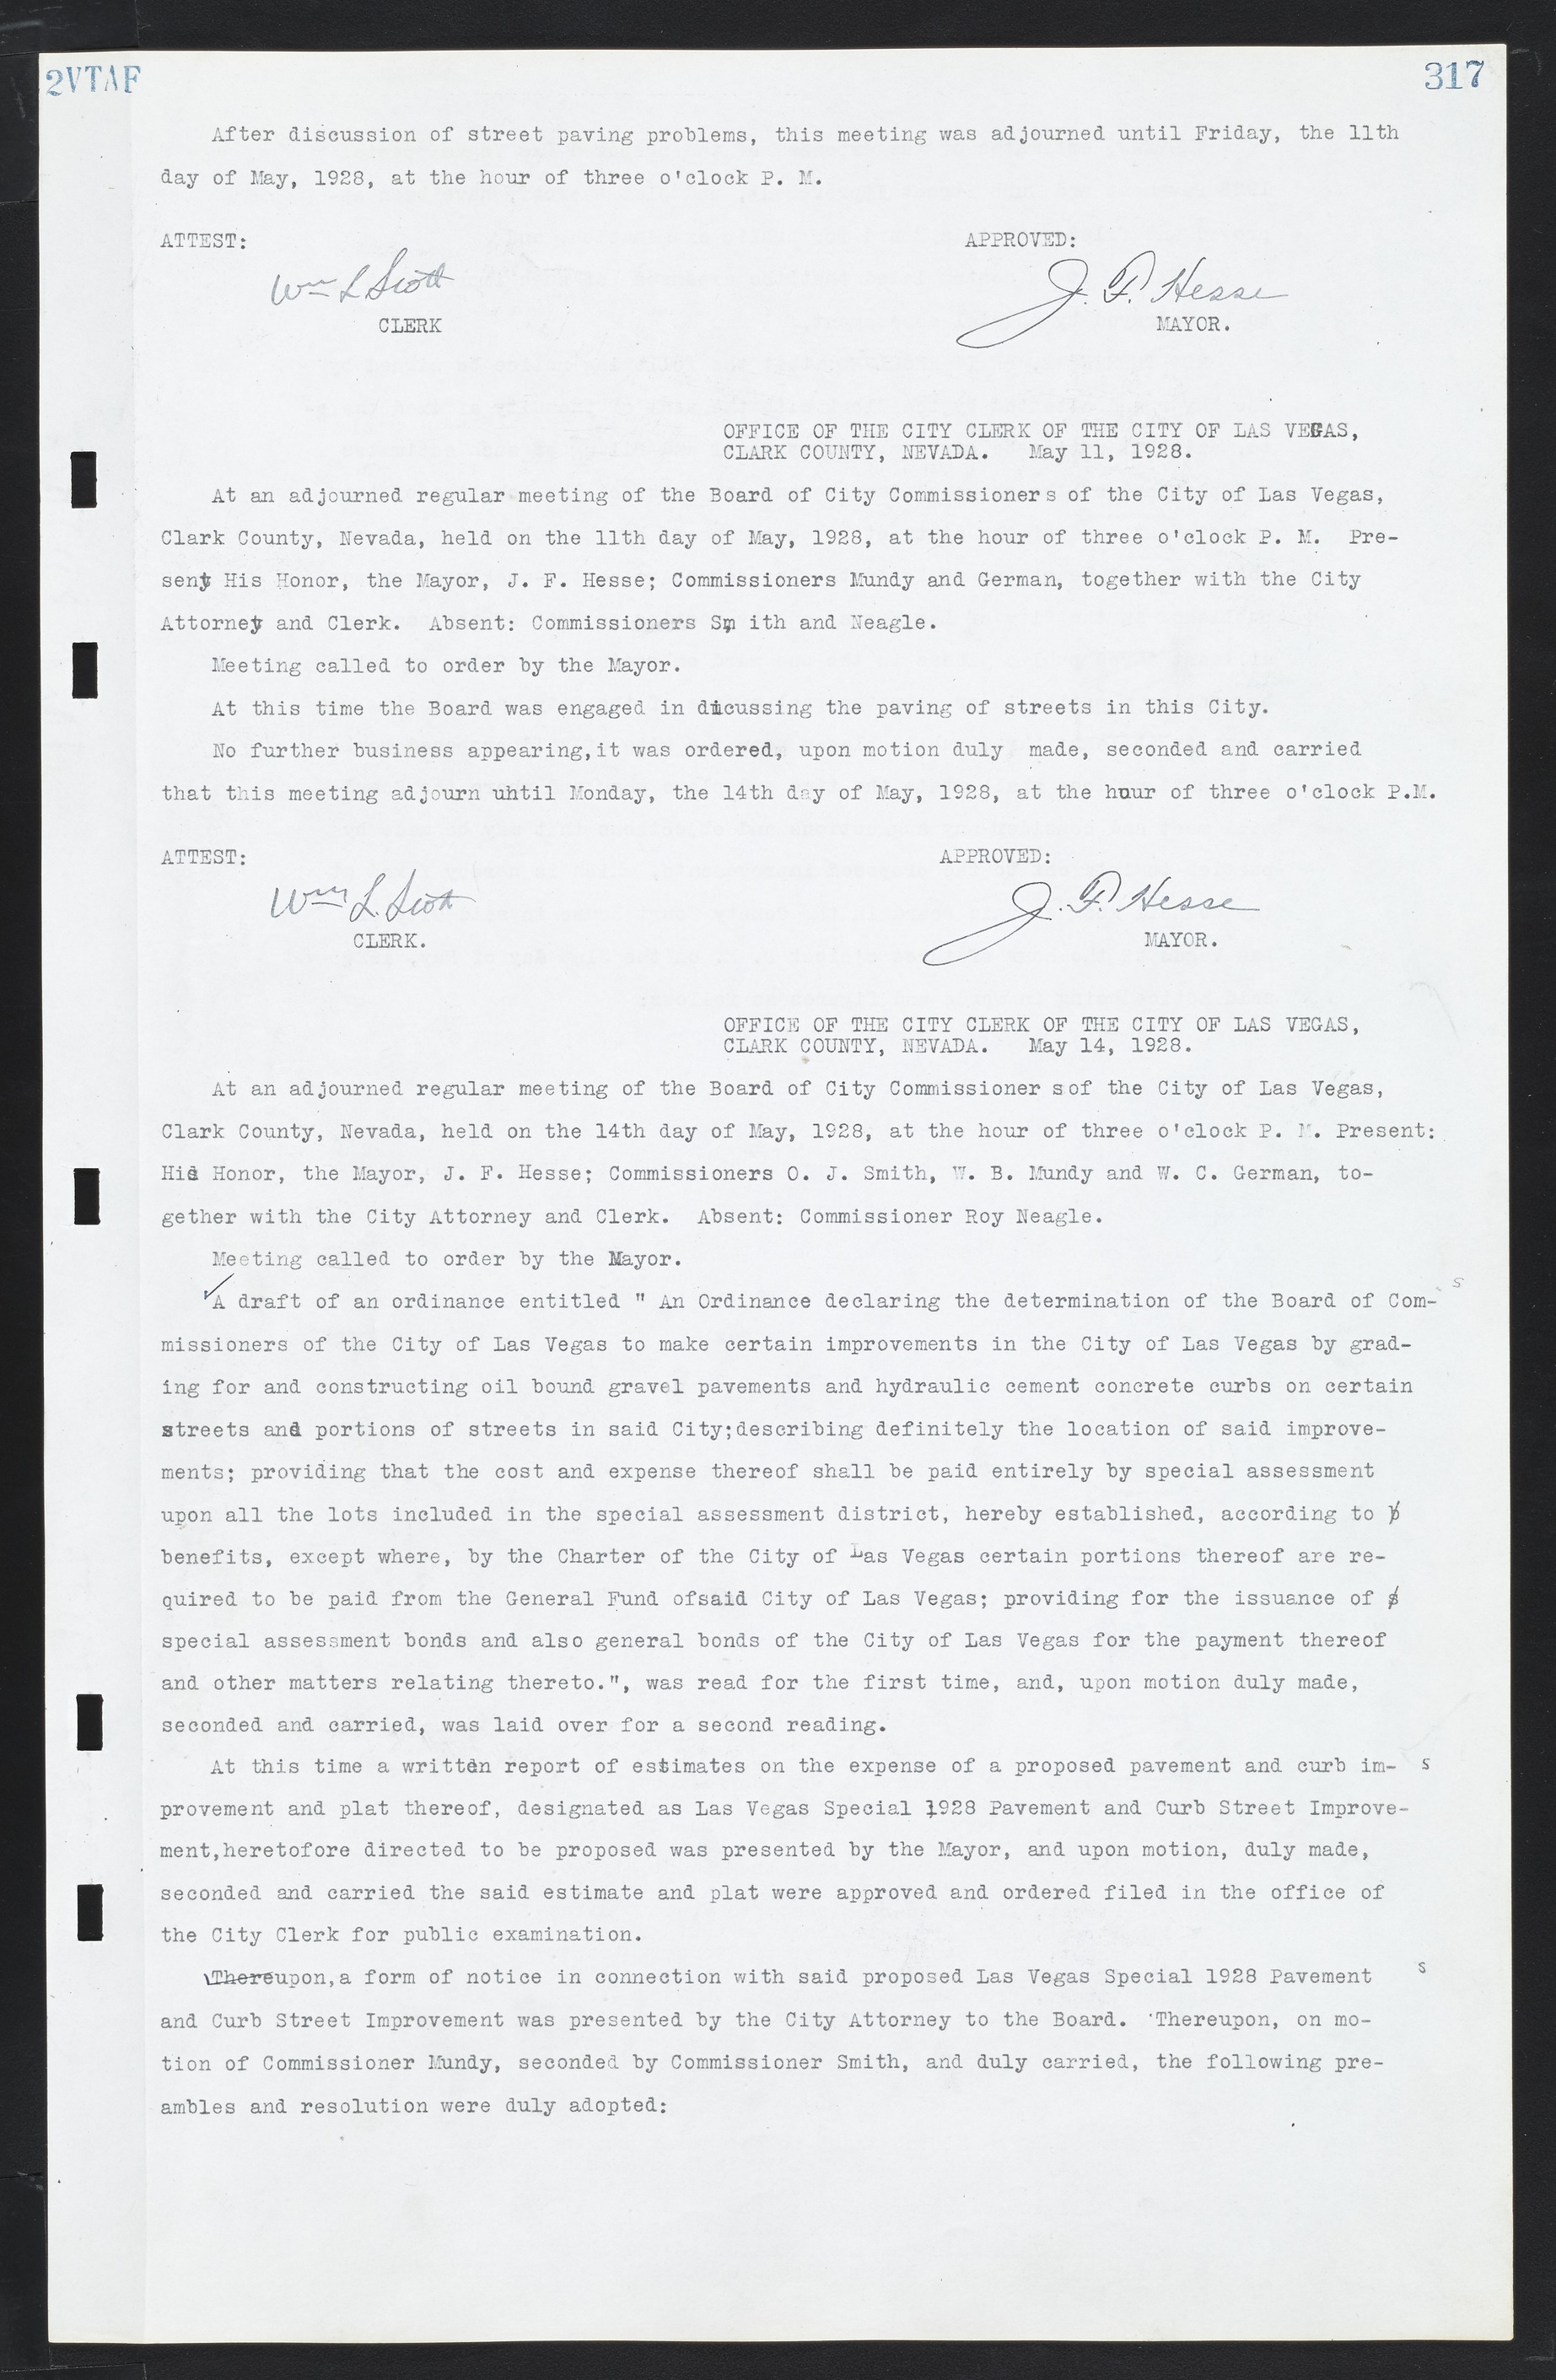 Las Vegas City Commission Minutes, March 1, 1922 to May 10, 1929, lvc000002-326